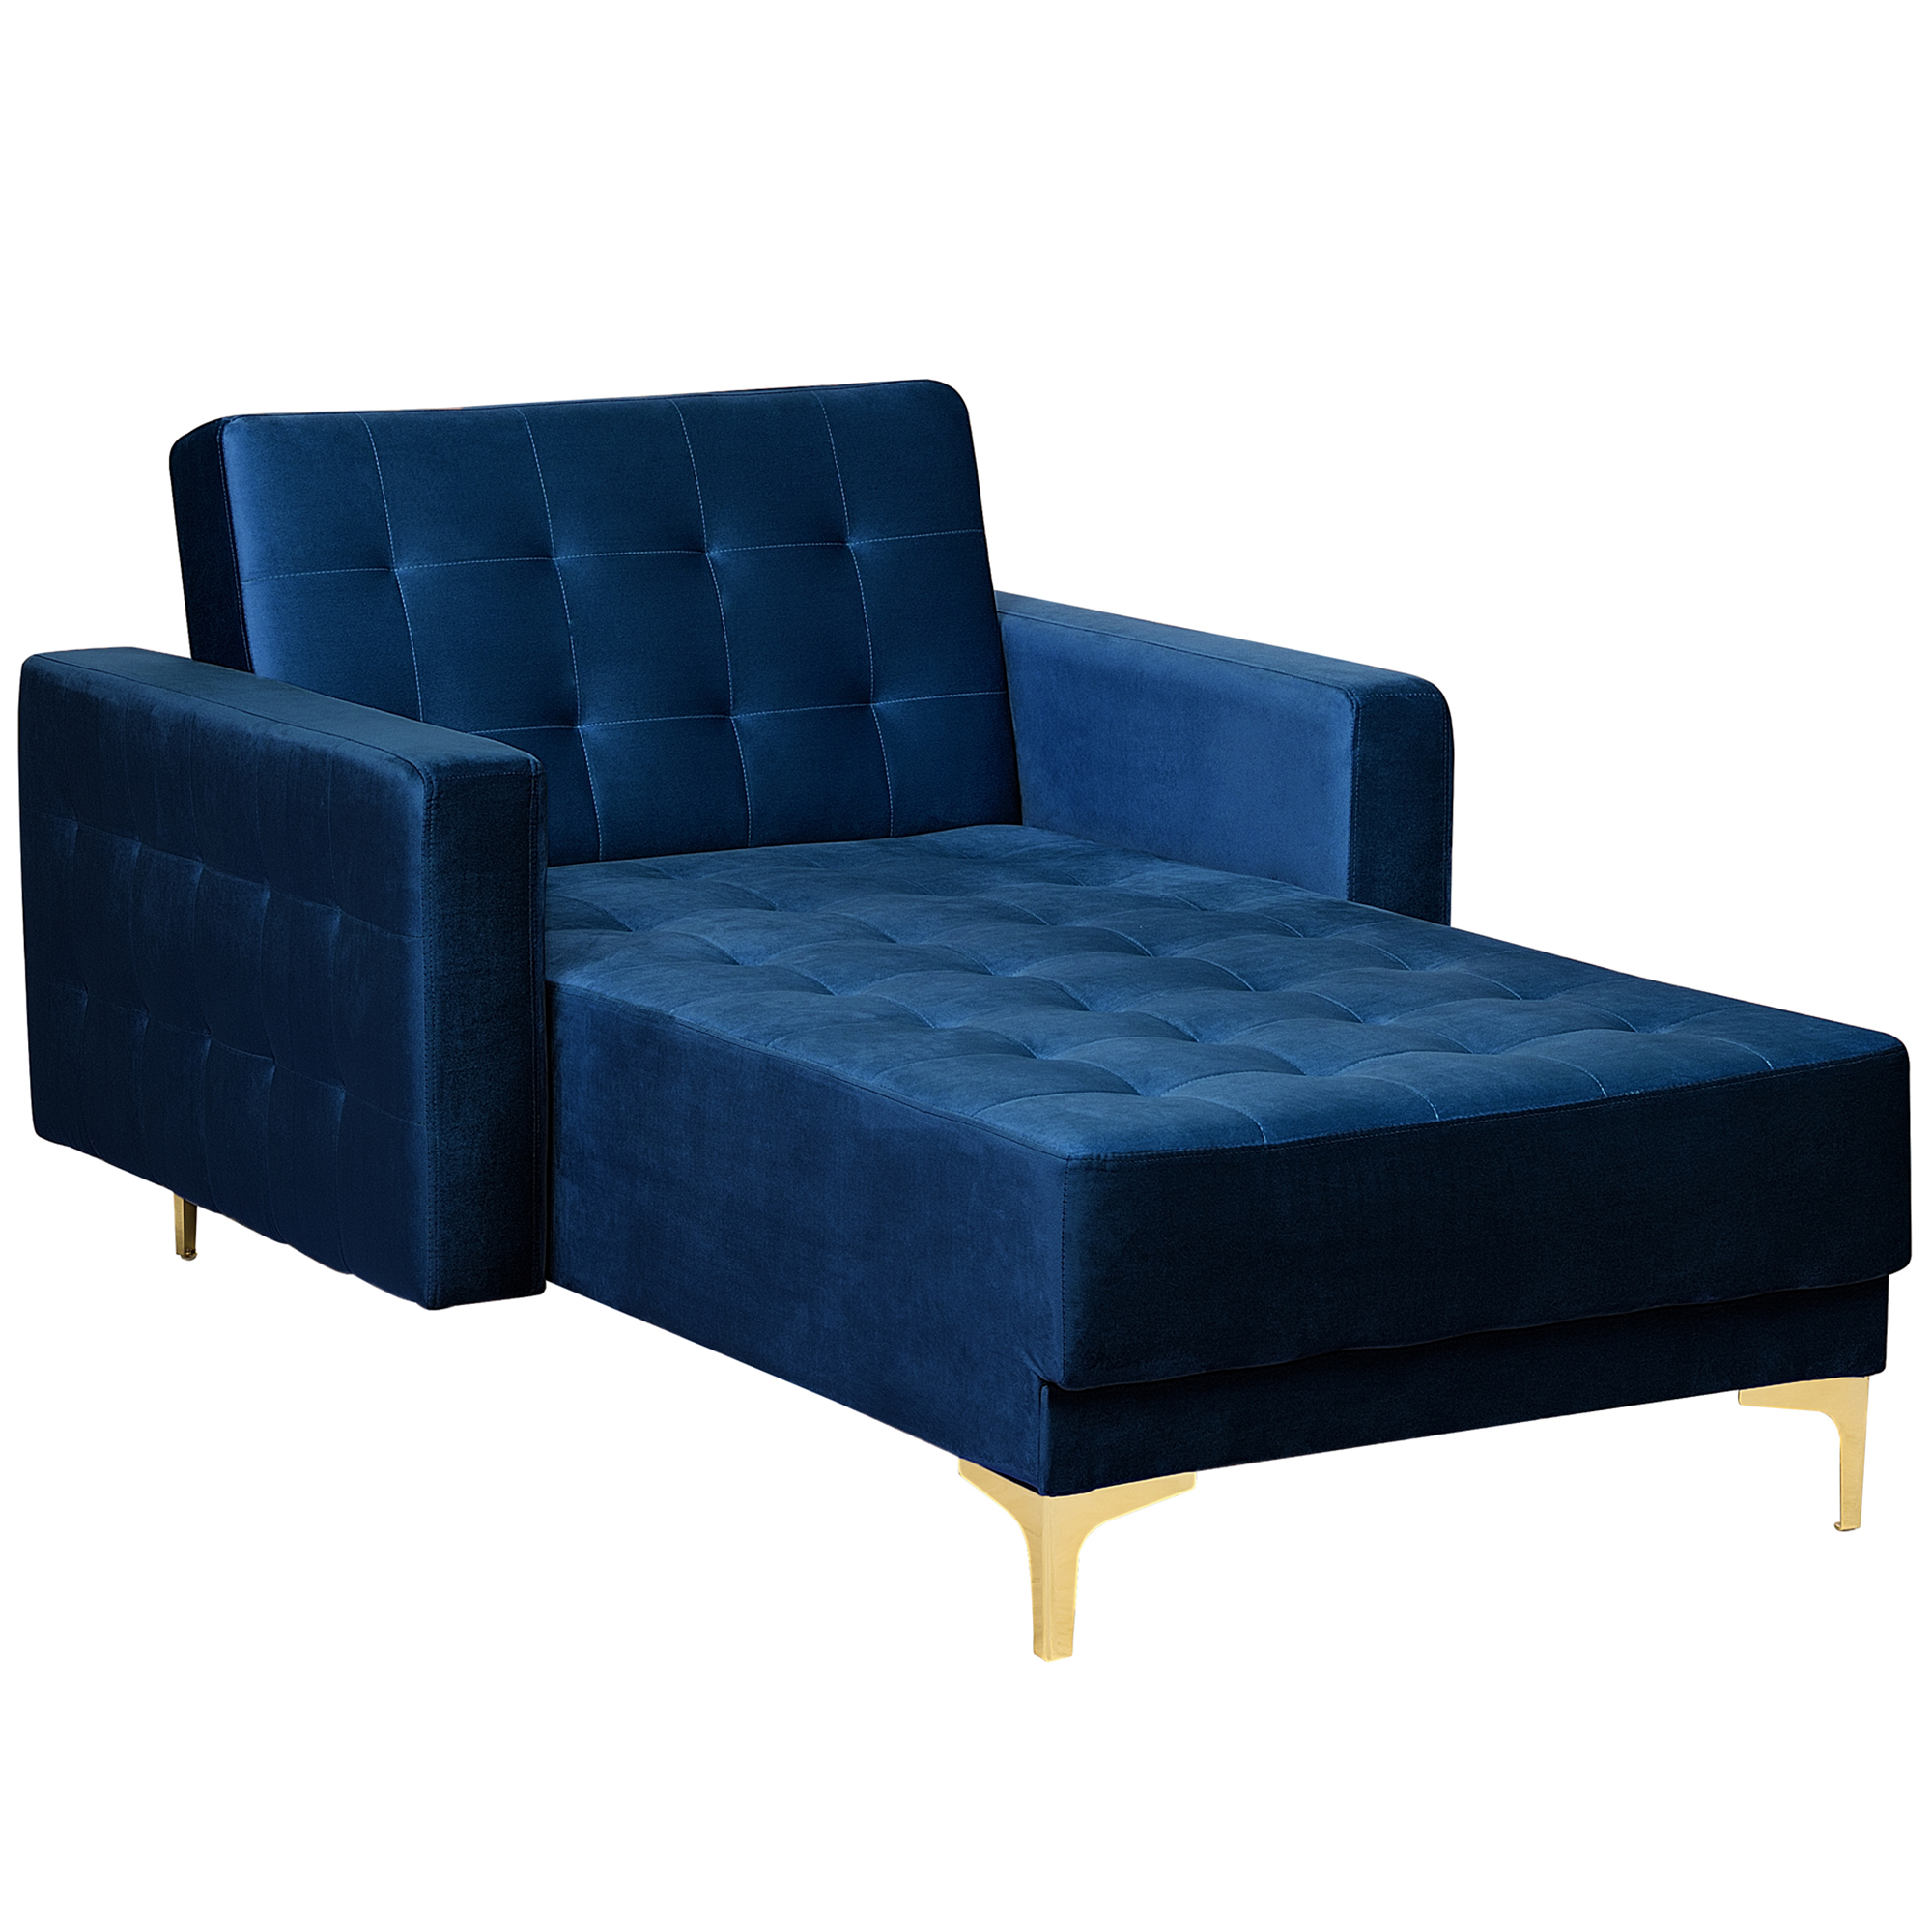 Beliani Chaise Lounge Navy Blue Velvet Tufted Fabric Modern Living Room Reclining Day Bed Gold Legs Track Arms